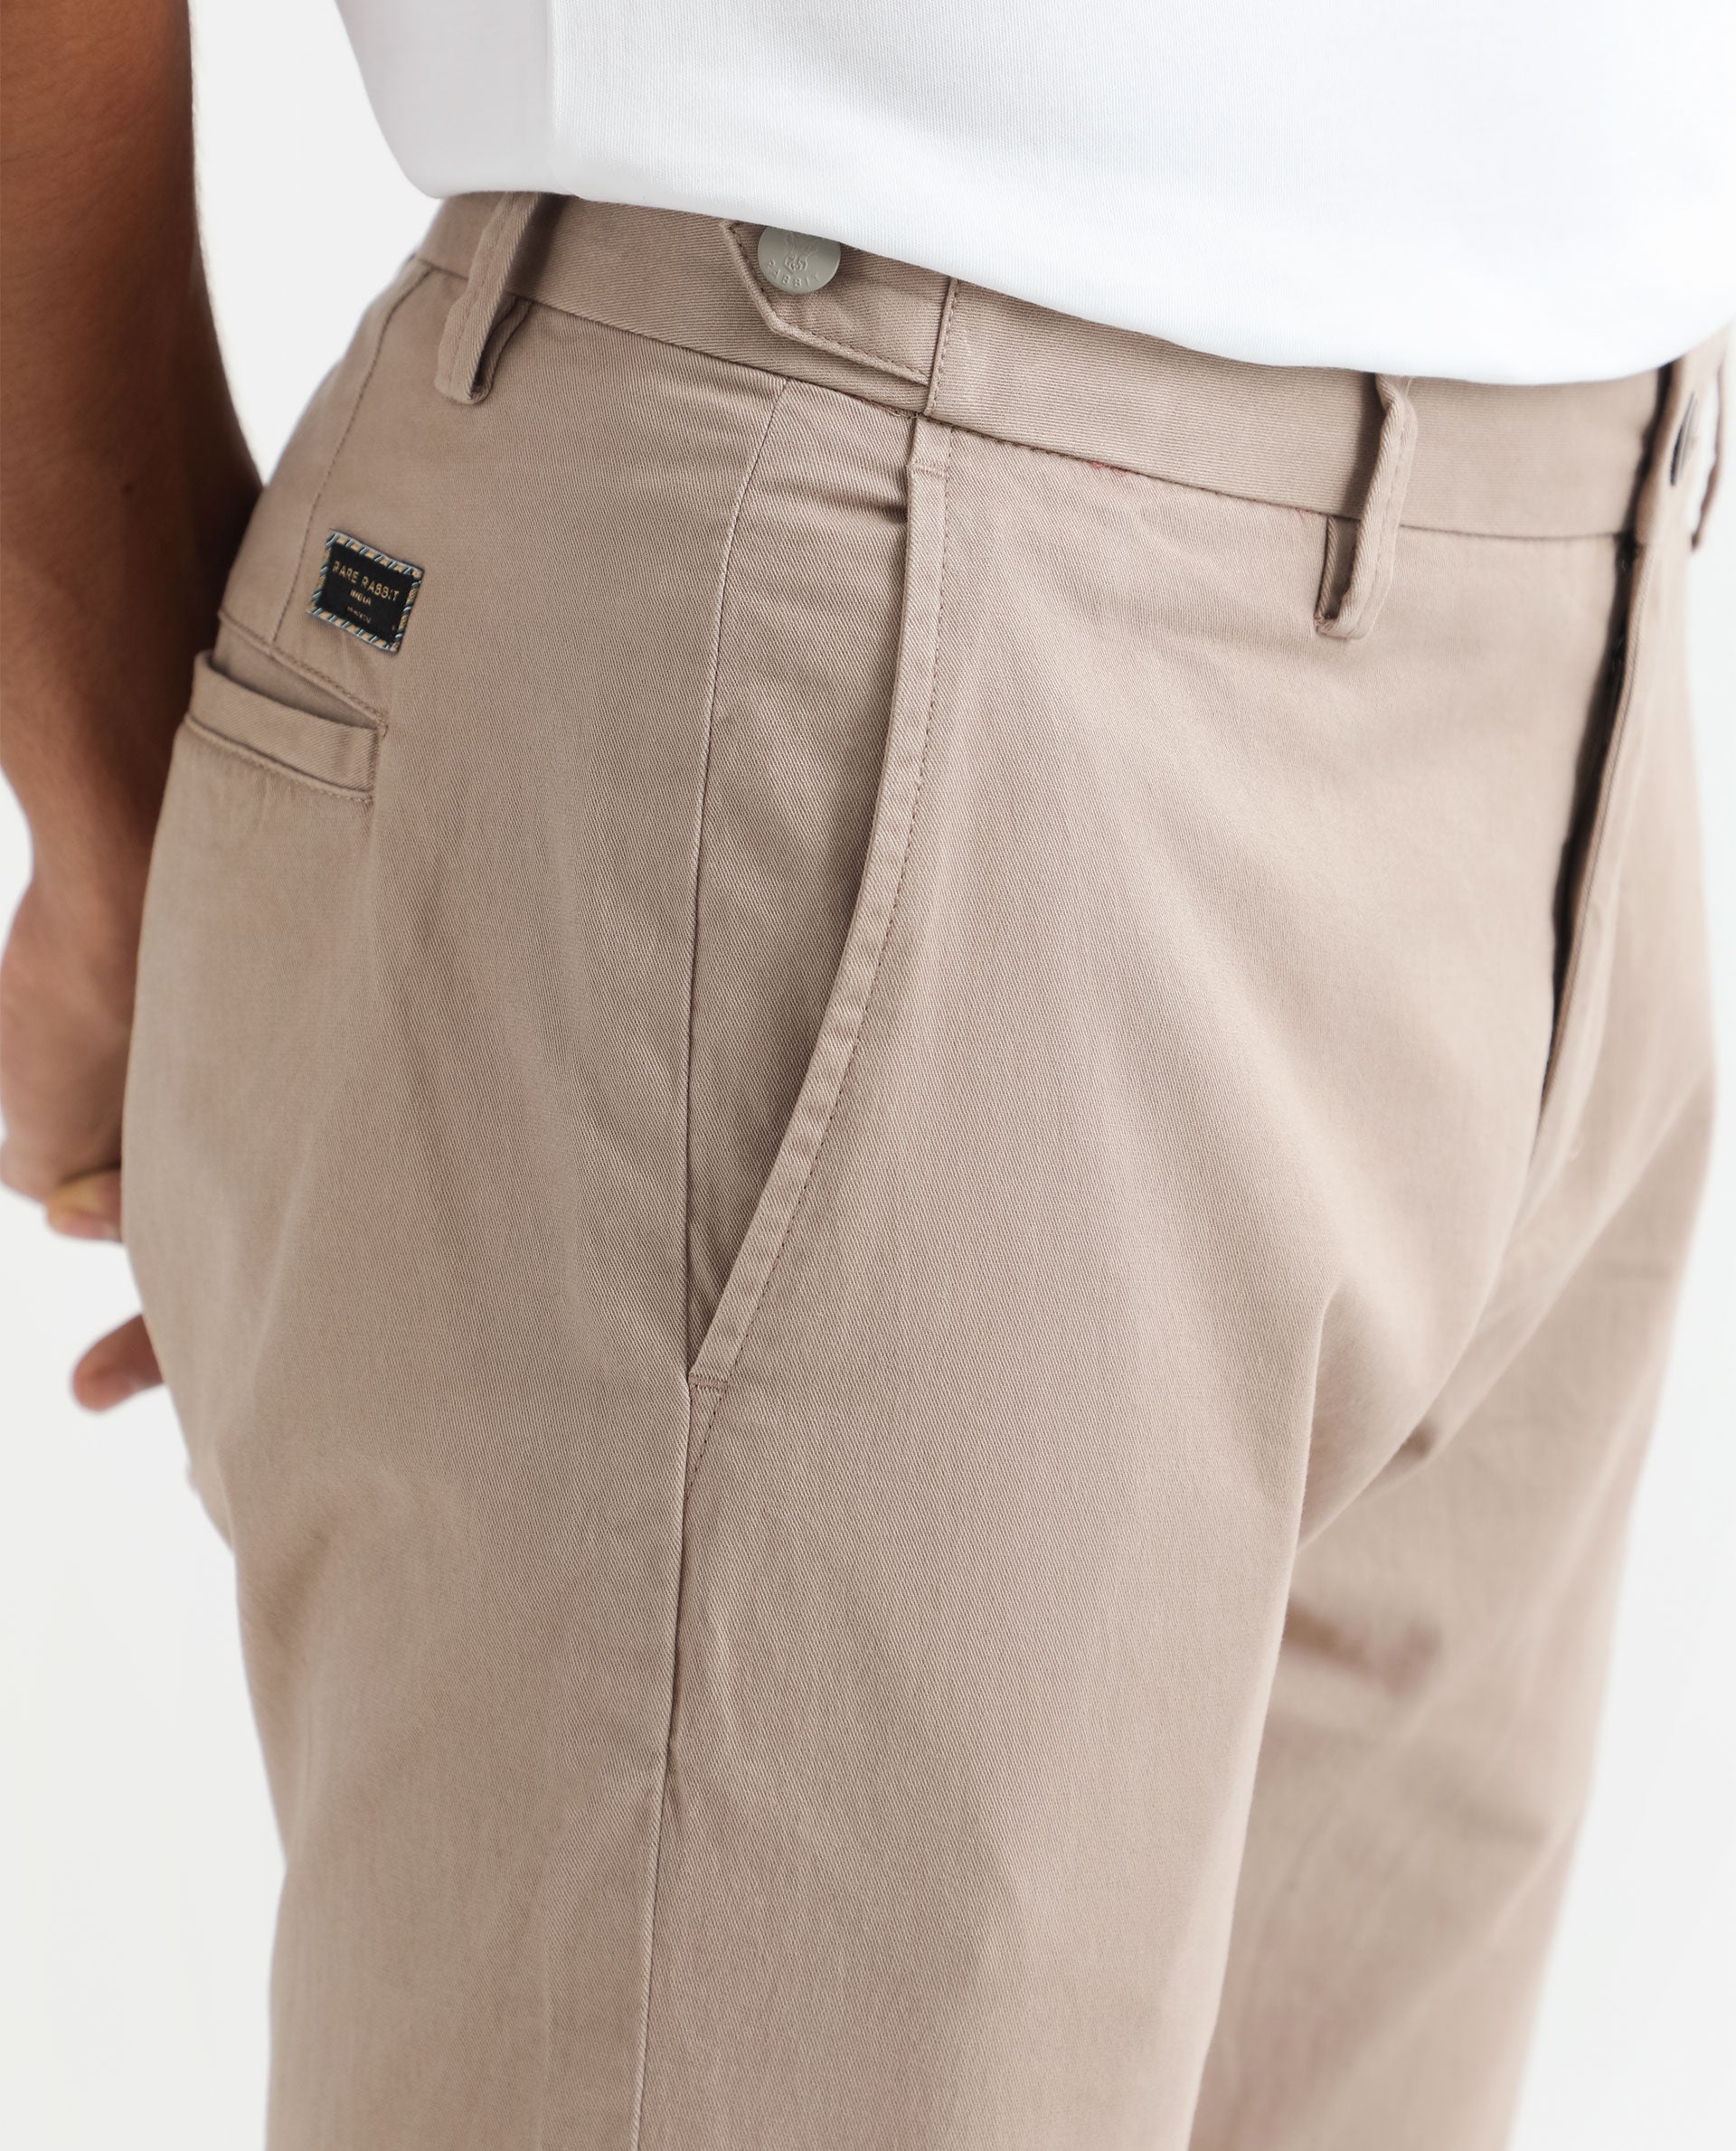 Beige trousers for men with side pockets  Exibit